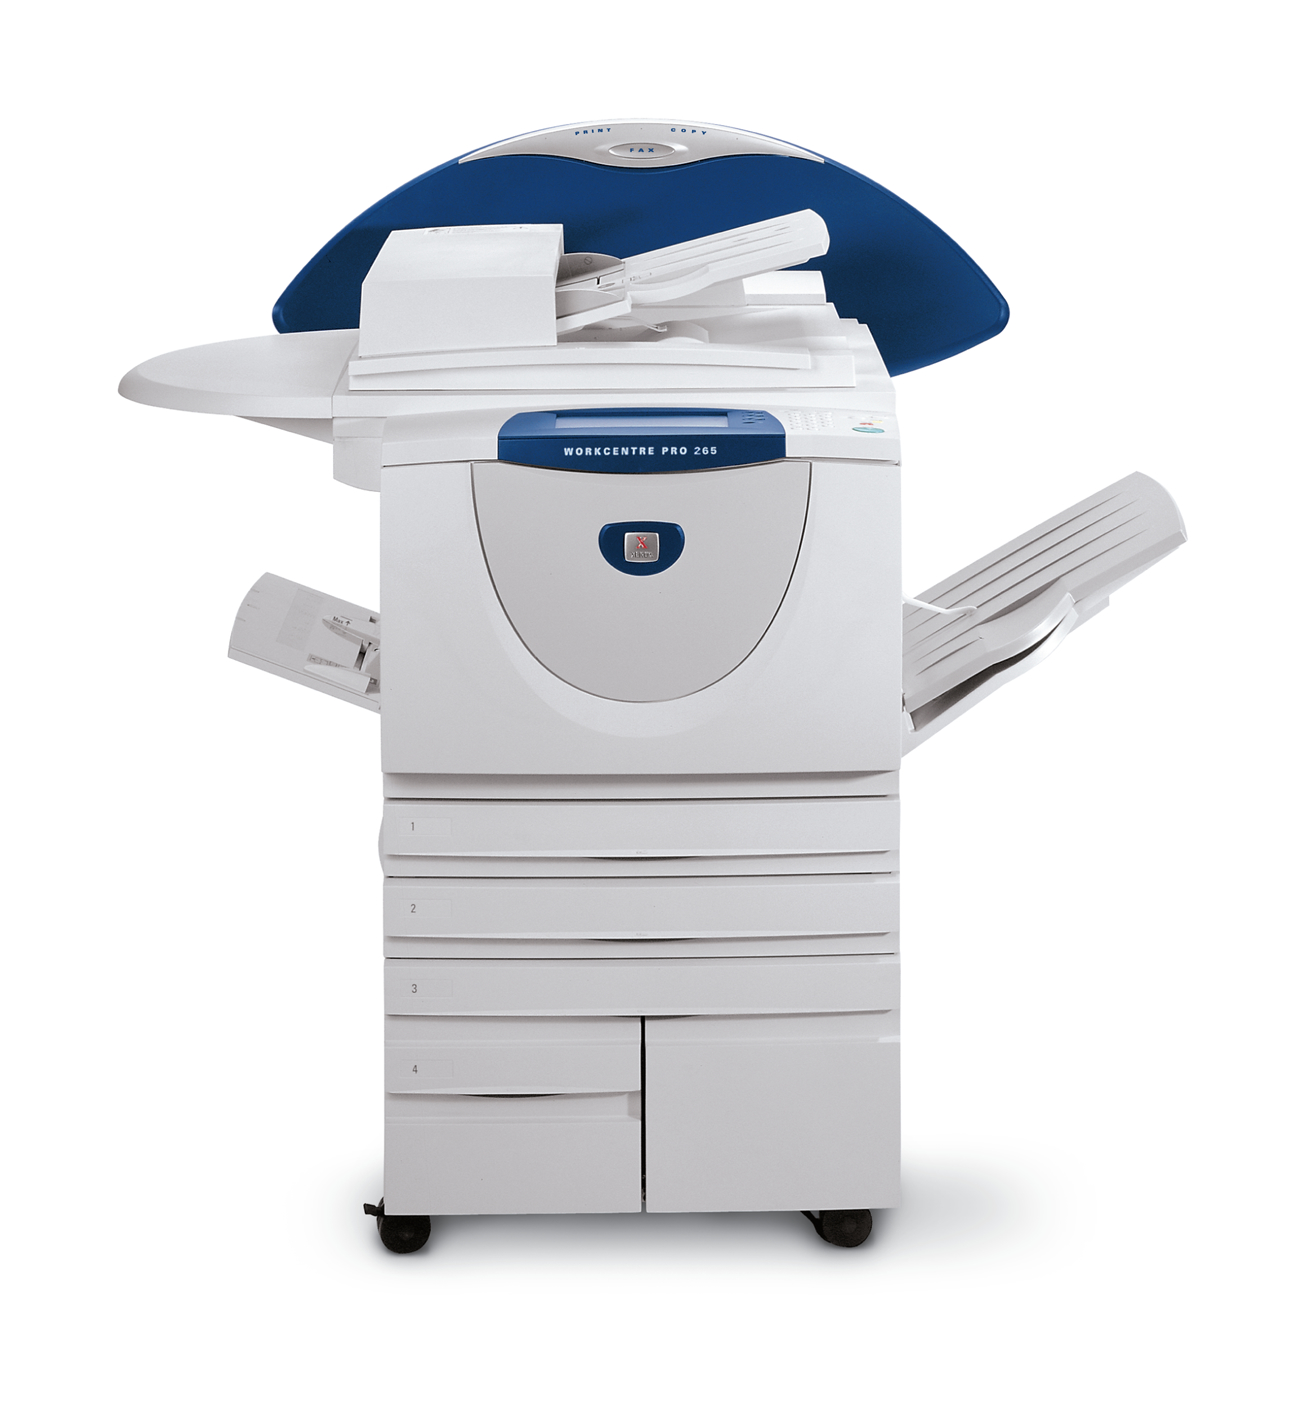 The WorkCentre Pro 265 is an advanced multifunction printer with a speed of  up to 65 pages per minute. This device offers print, copy, scan, fax and  email capabilities. It's a true